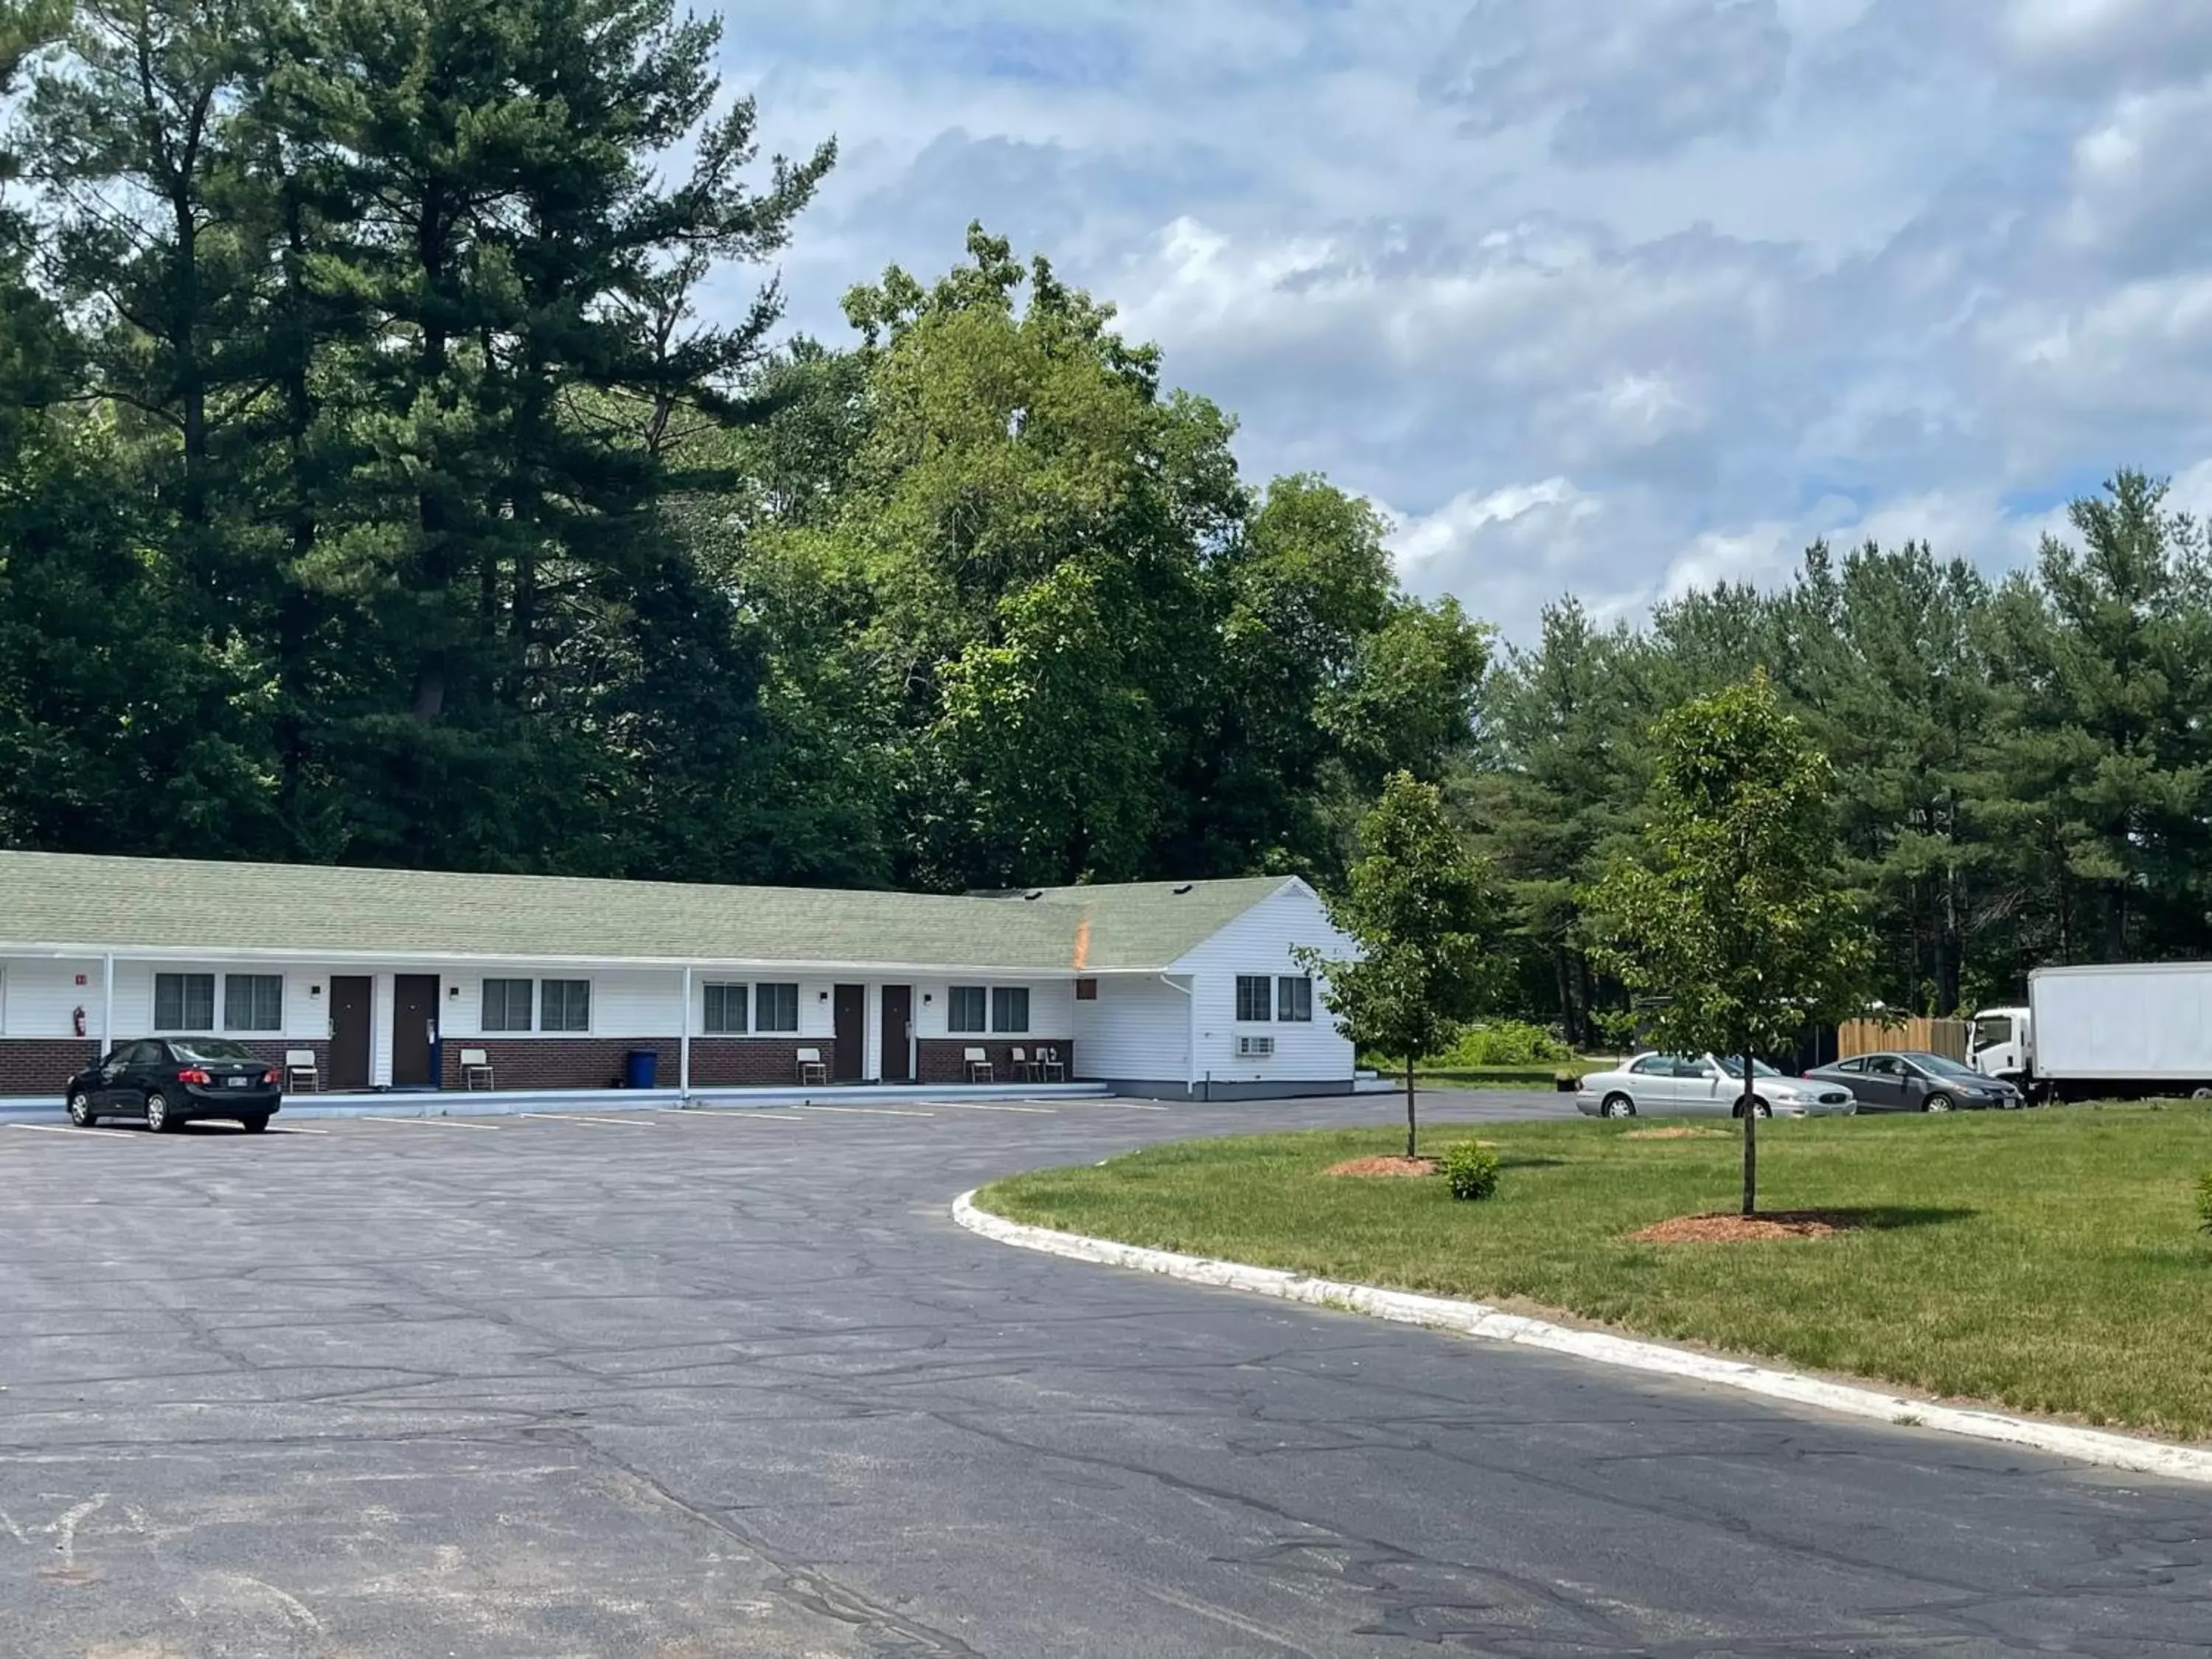 Property Building in The Minuteman Inn Acton Concord Littleton